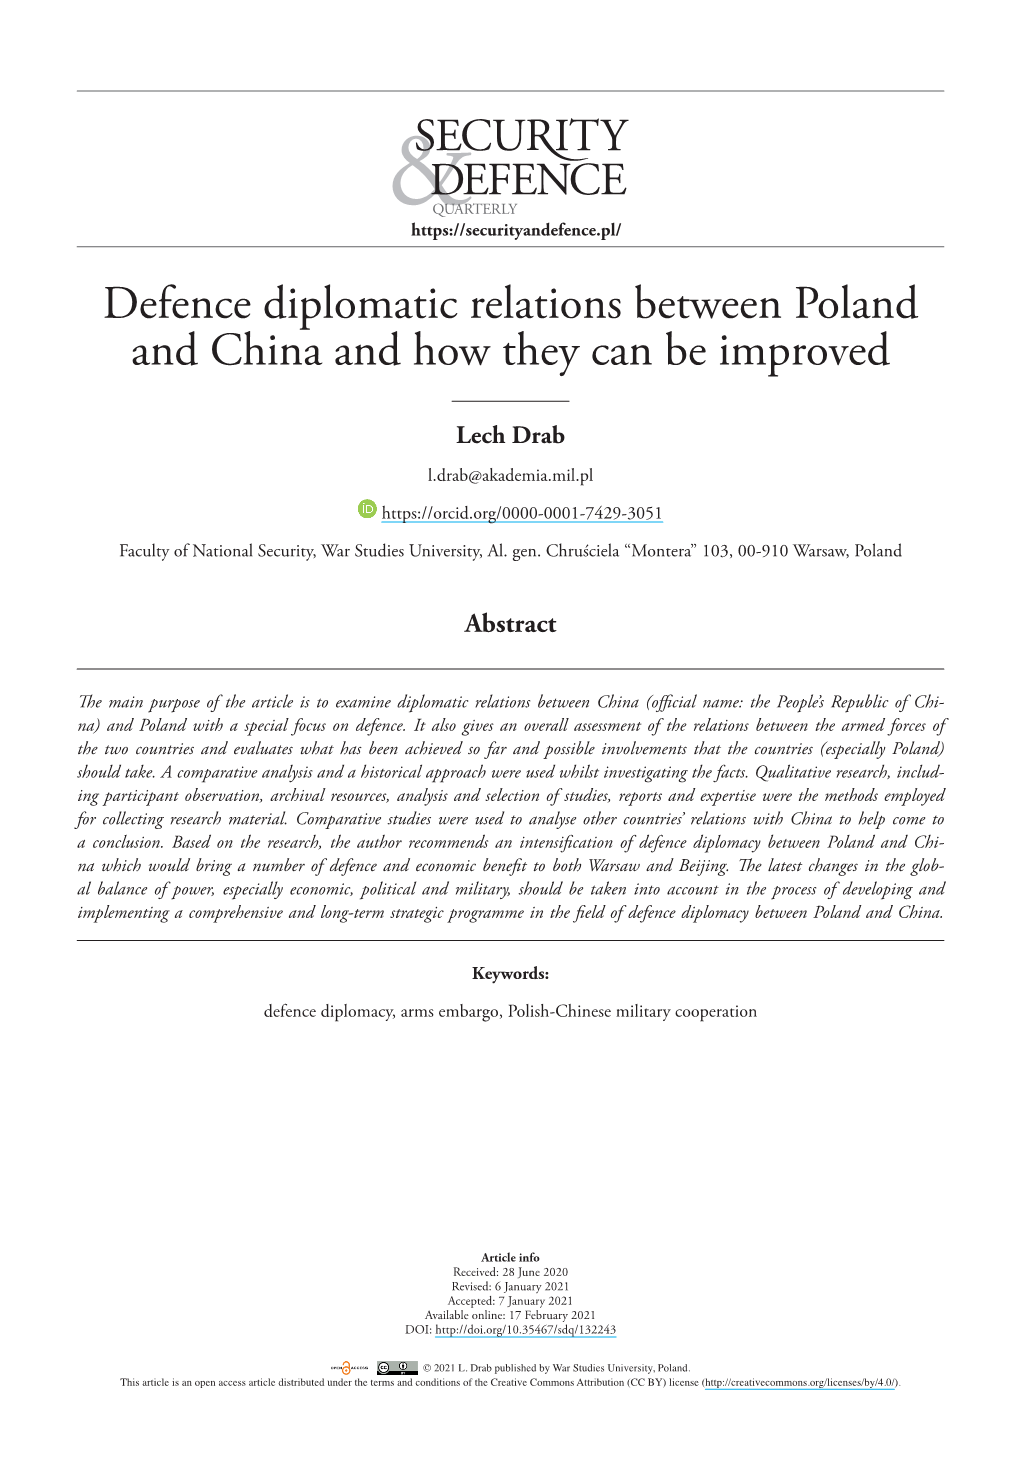 Defence Diplomatic Relations Between Poland and China and How They Can Be Improved